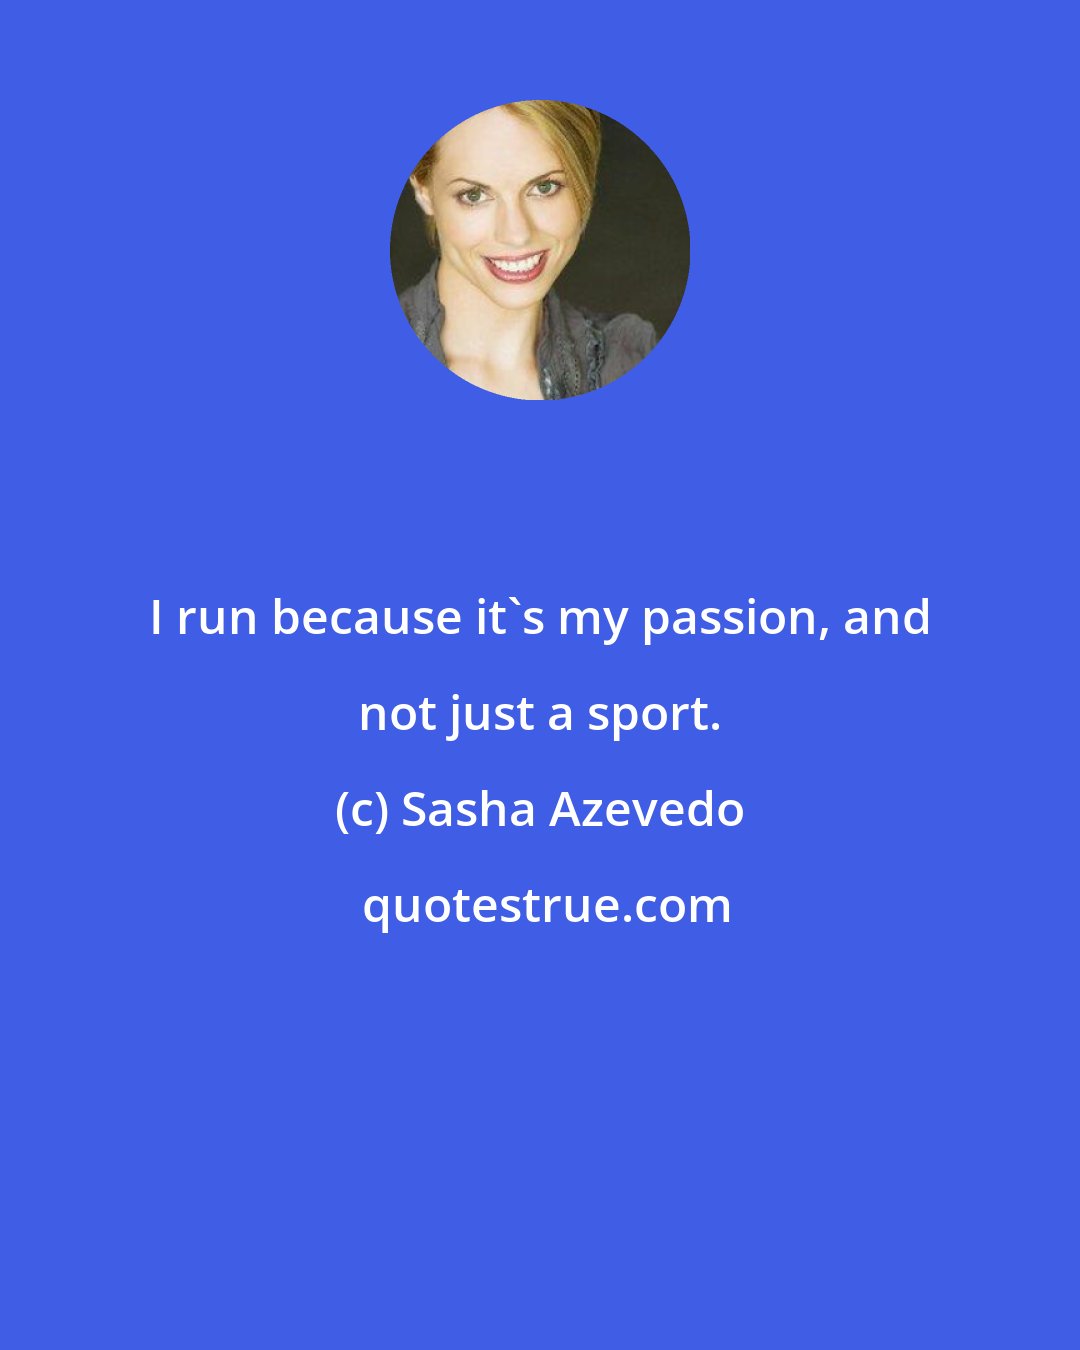 Sasha Azevedo: I run because it's my passion, and not just a sport.